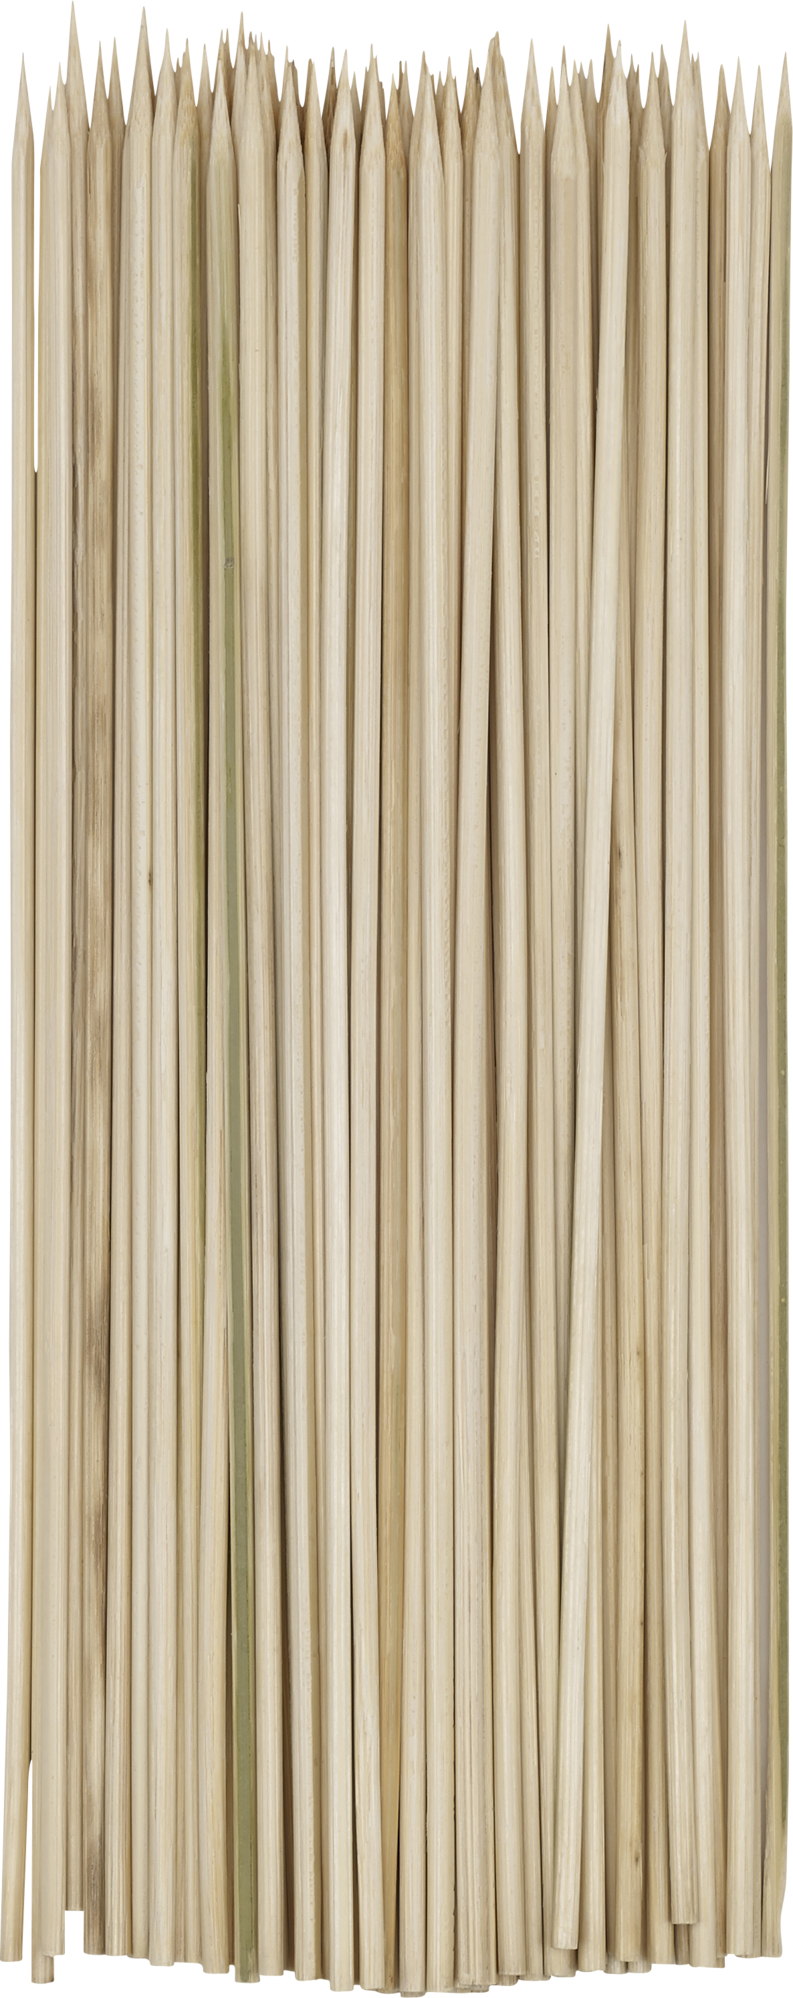 GoodCook Silver Bamboo 12" Skewers Pack, 100 Count - image 1 of 6